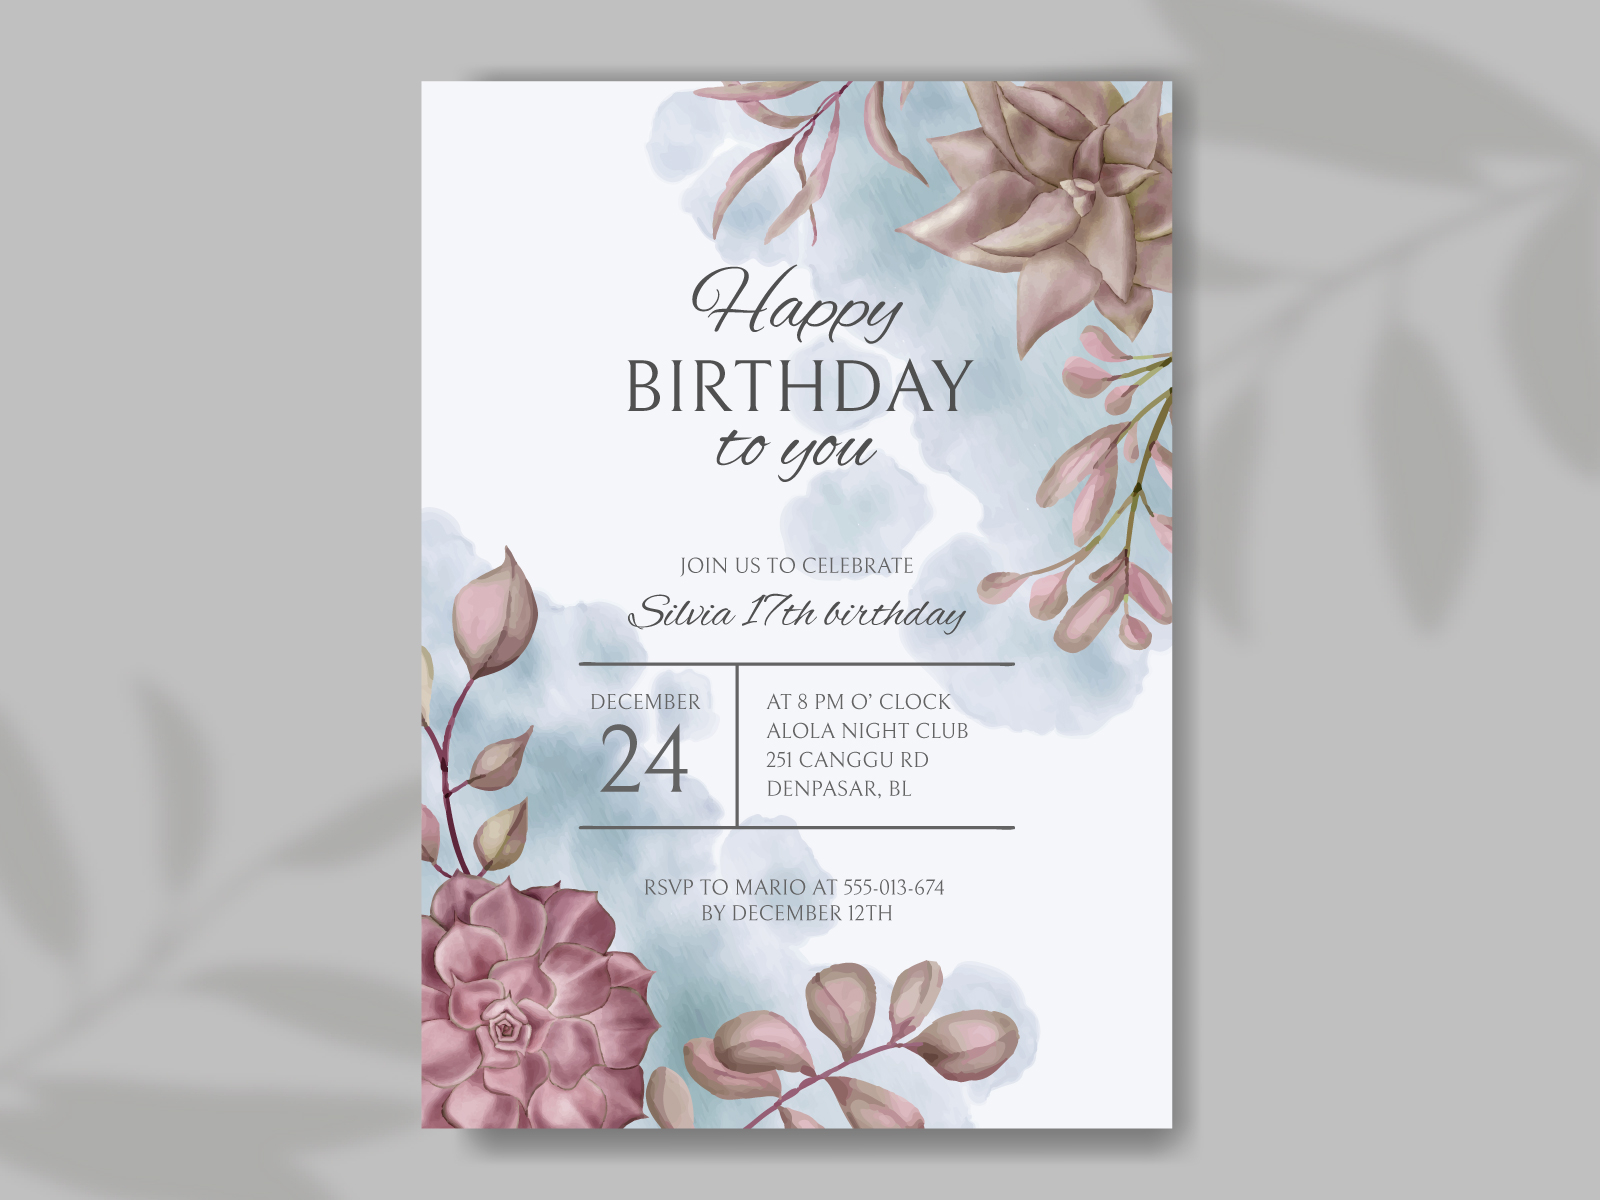 Invitation Card With Cake Royalty Free SVG, Cliparts, Vectors, and Stock  Illustration. Image 12485738.